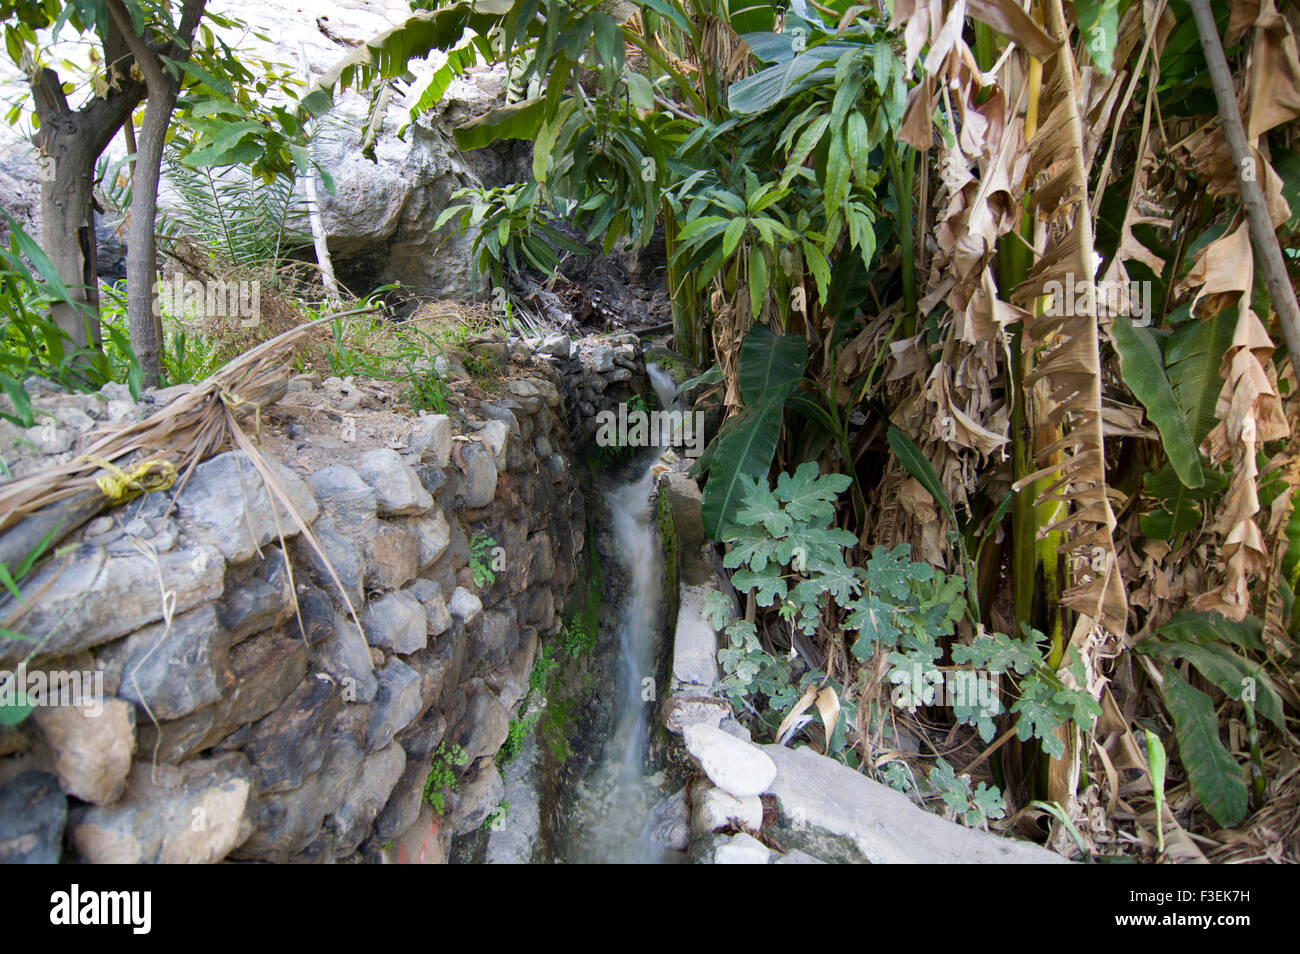 Falaj, ancient traditional Omani irrigation system in the oasis village of Misfat al Abrayeen in the Sultanate of Oman Stock Photo